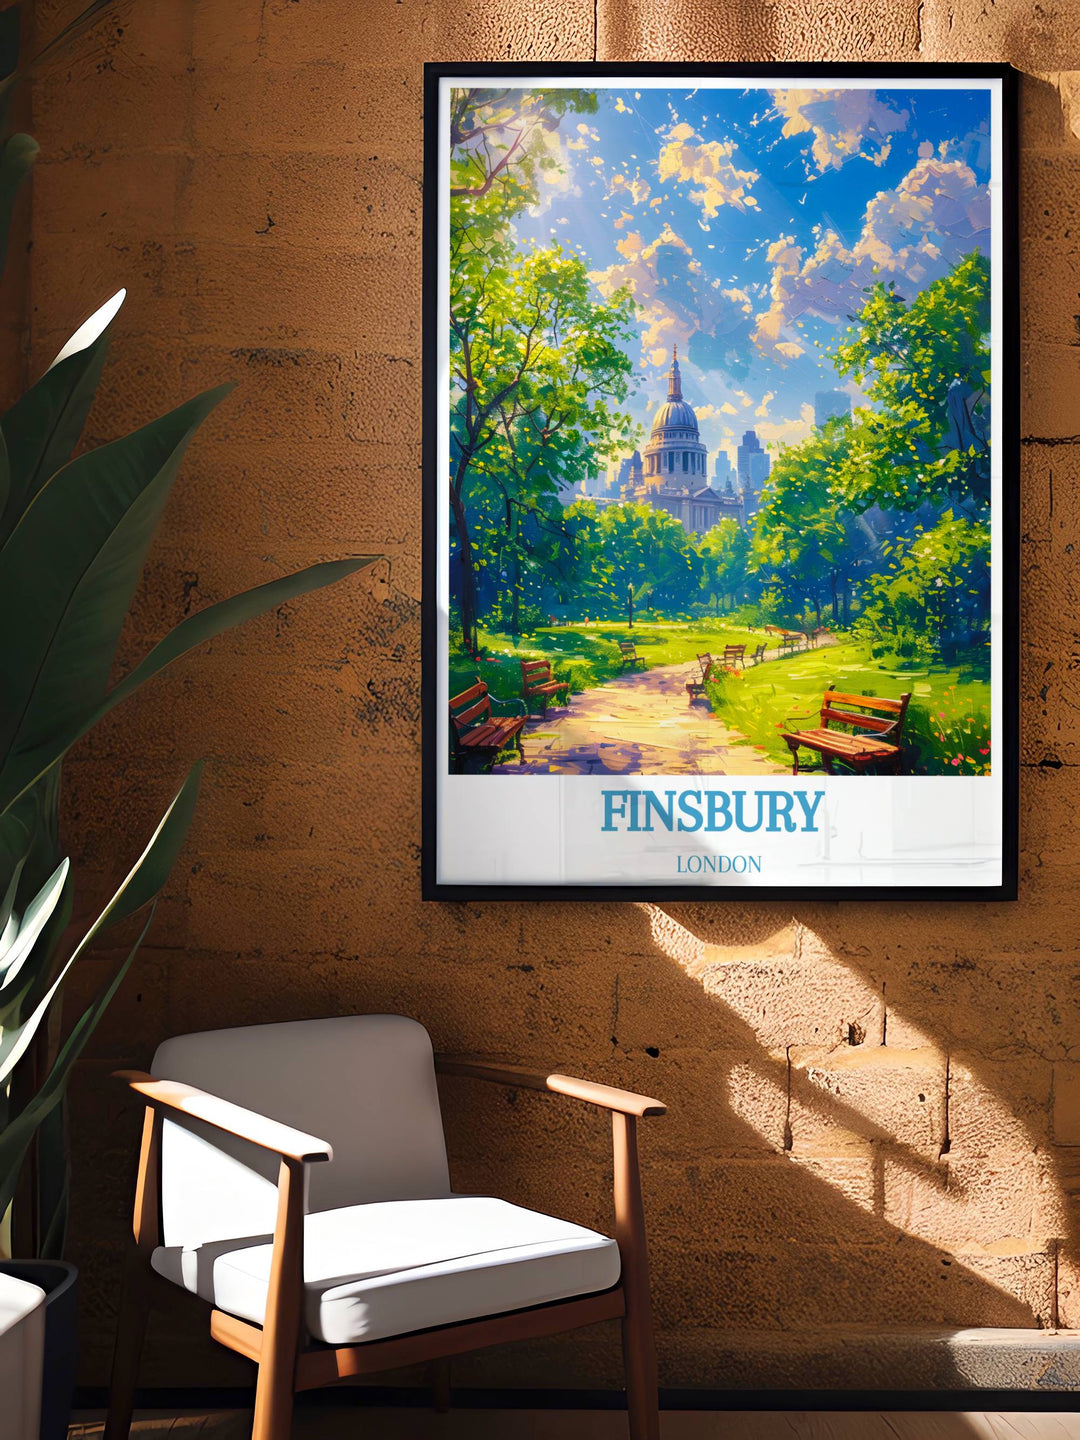 Add a touch of classic elegance to your space with this Finsbury Park retro travel poster. This detailed London illustration offers a nostalgic charm, perfect for those who appreciate vintage art styles. A great addition to your decor.